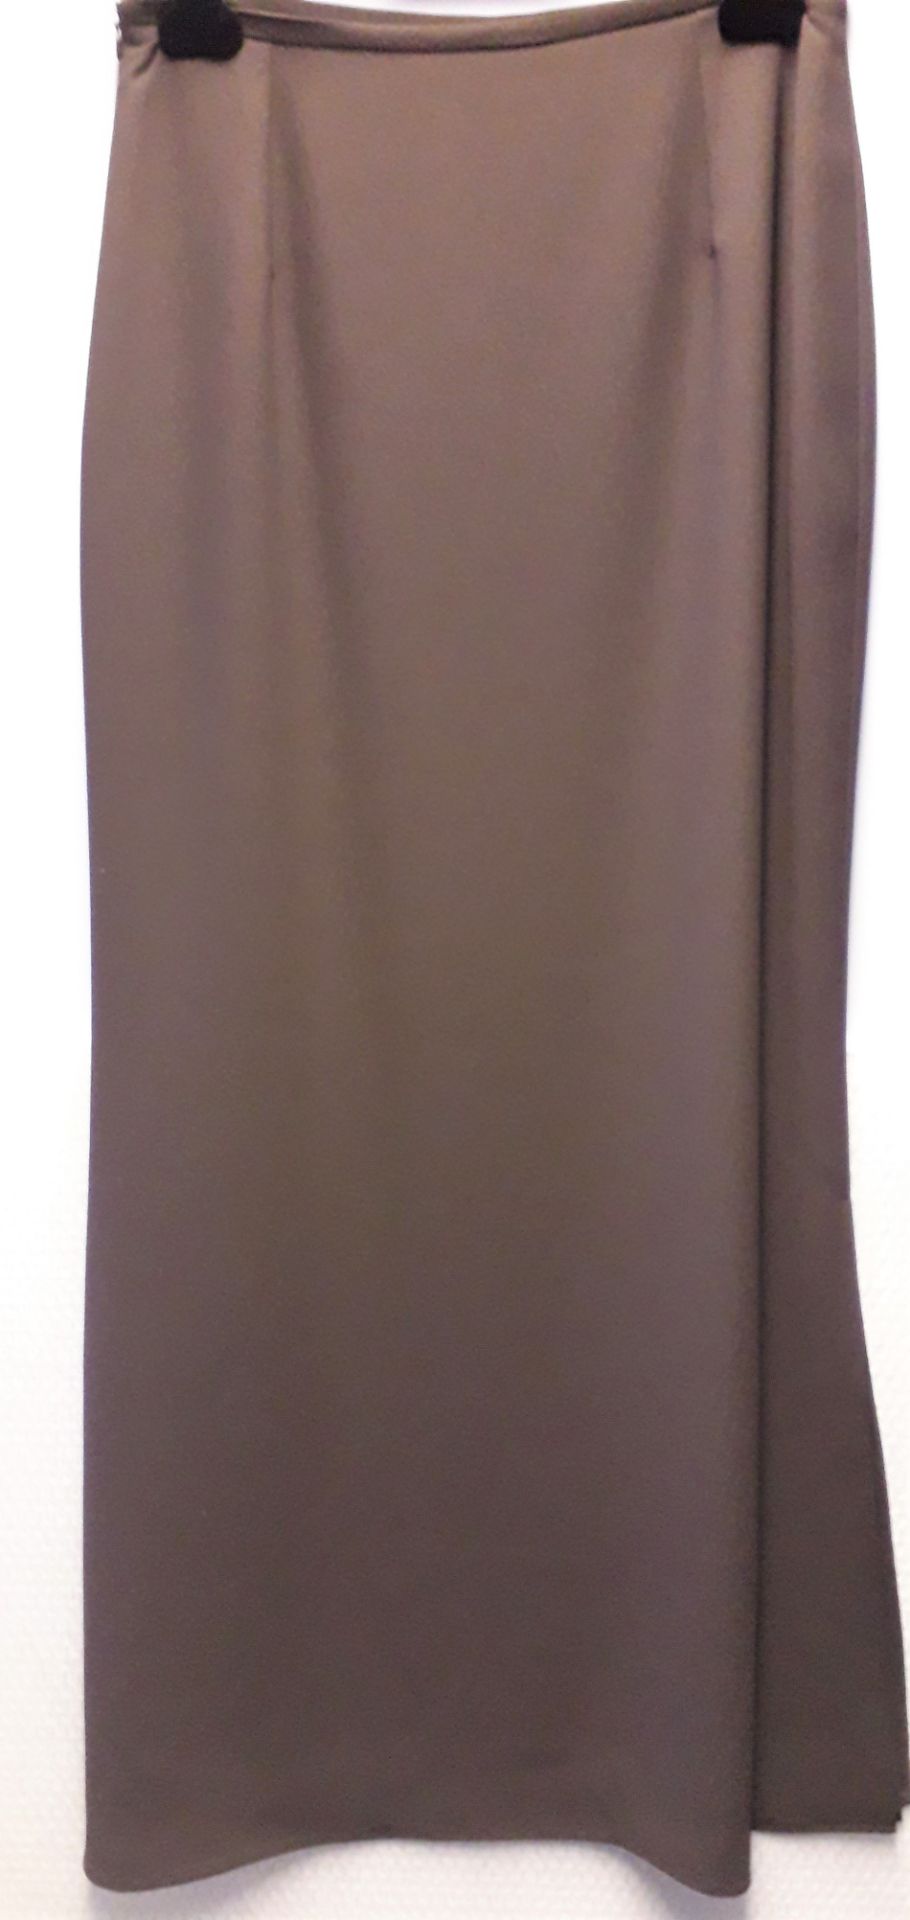 1 x Anne Belin Rich Brown Longer Length Skirt - Size: 16 - Material: 100% Polyester - From a High - Image 7 of 7